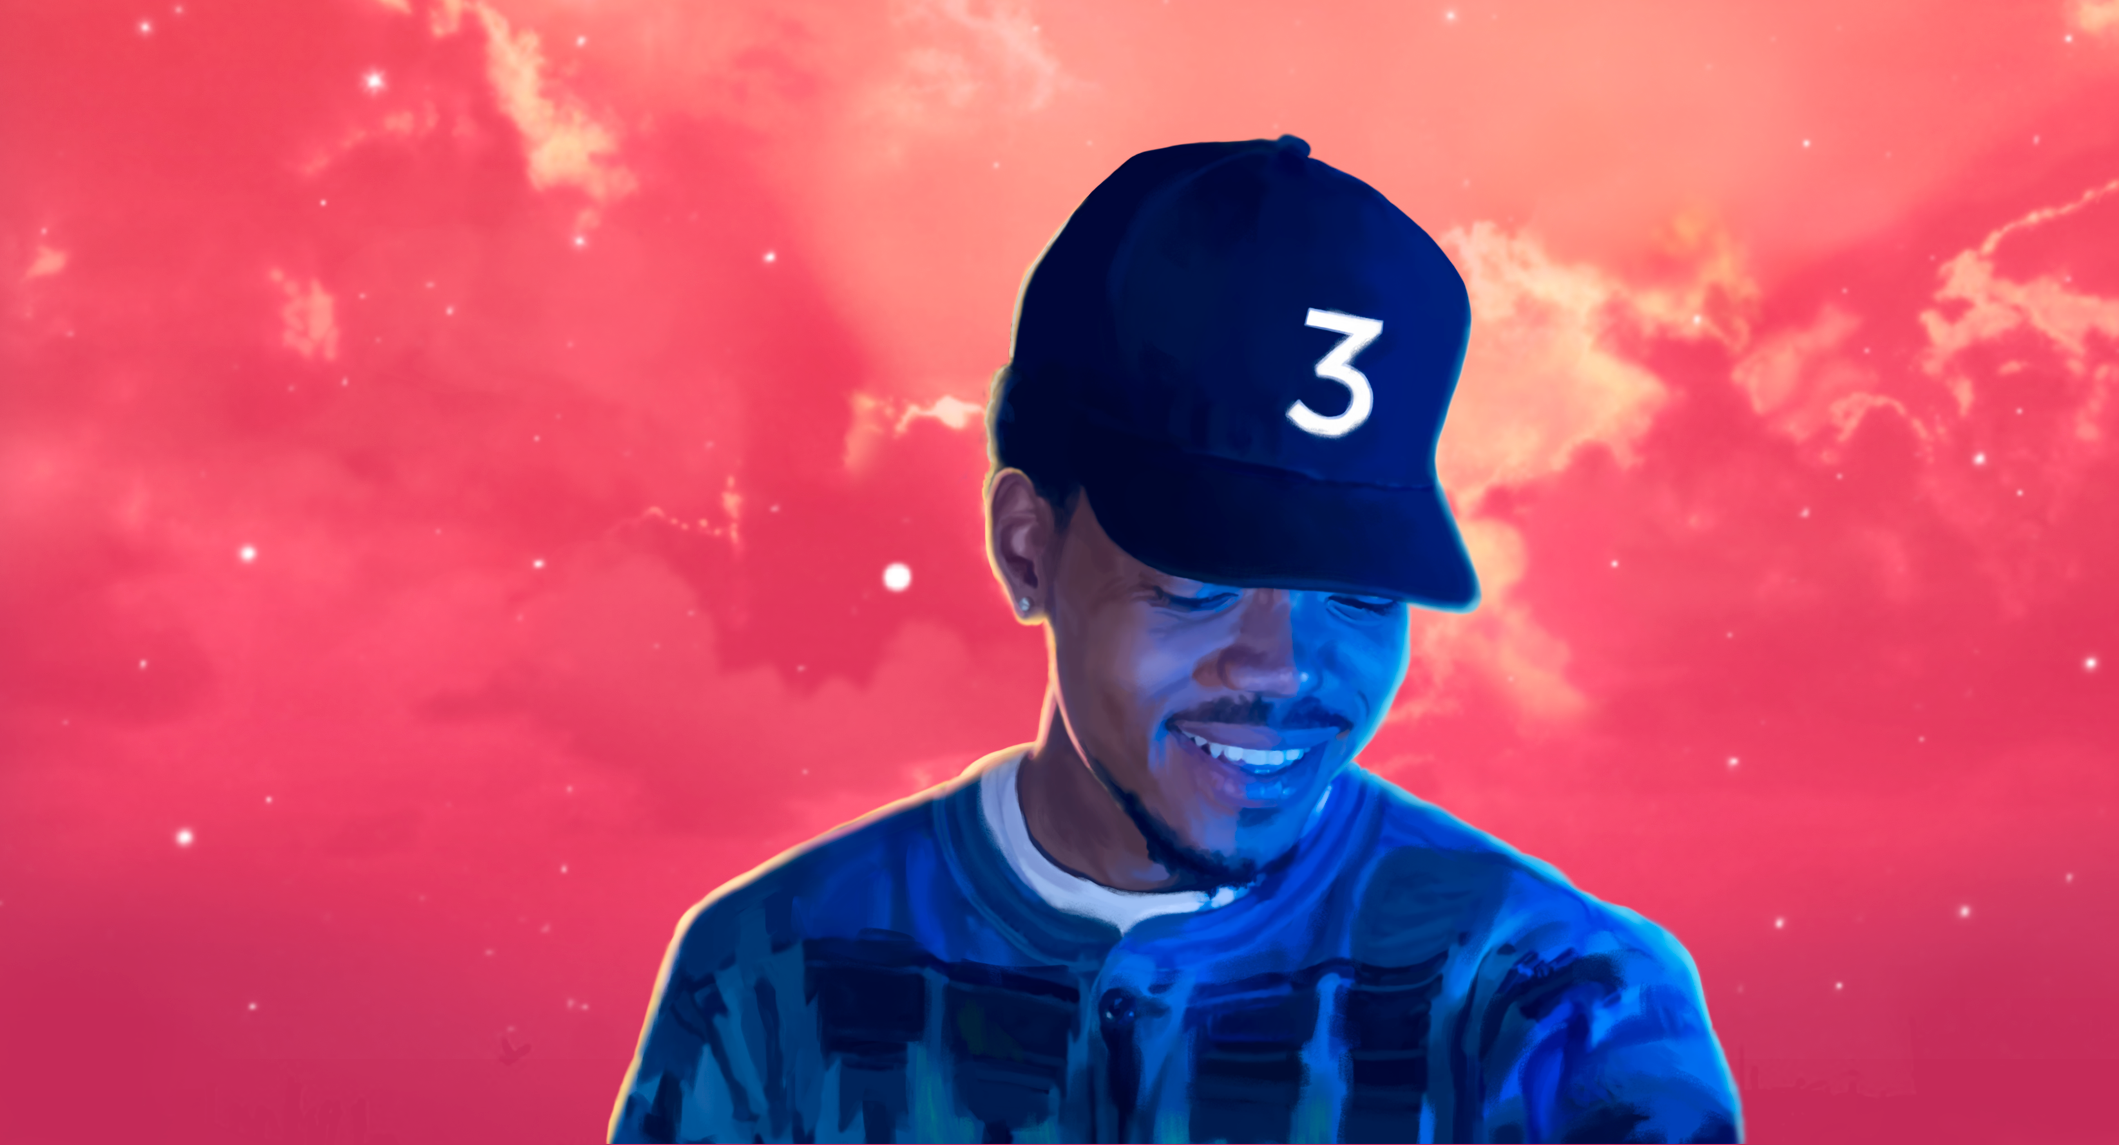 chance the rapper 3